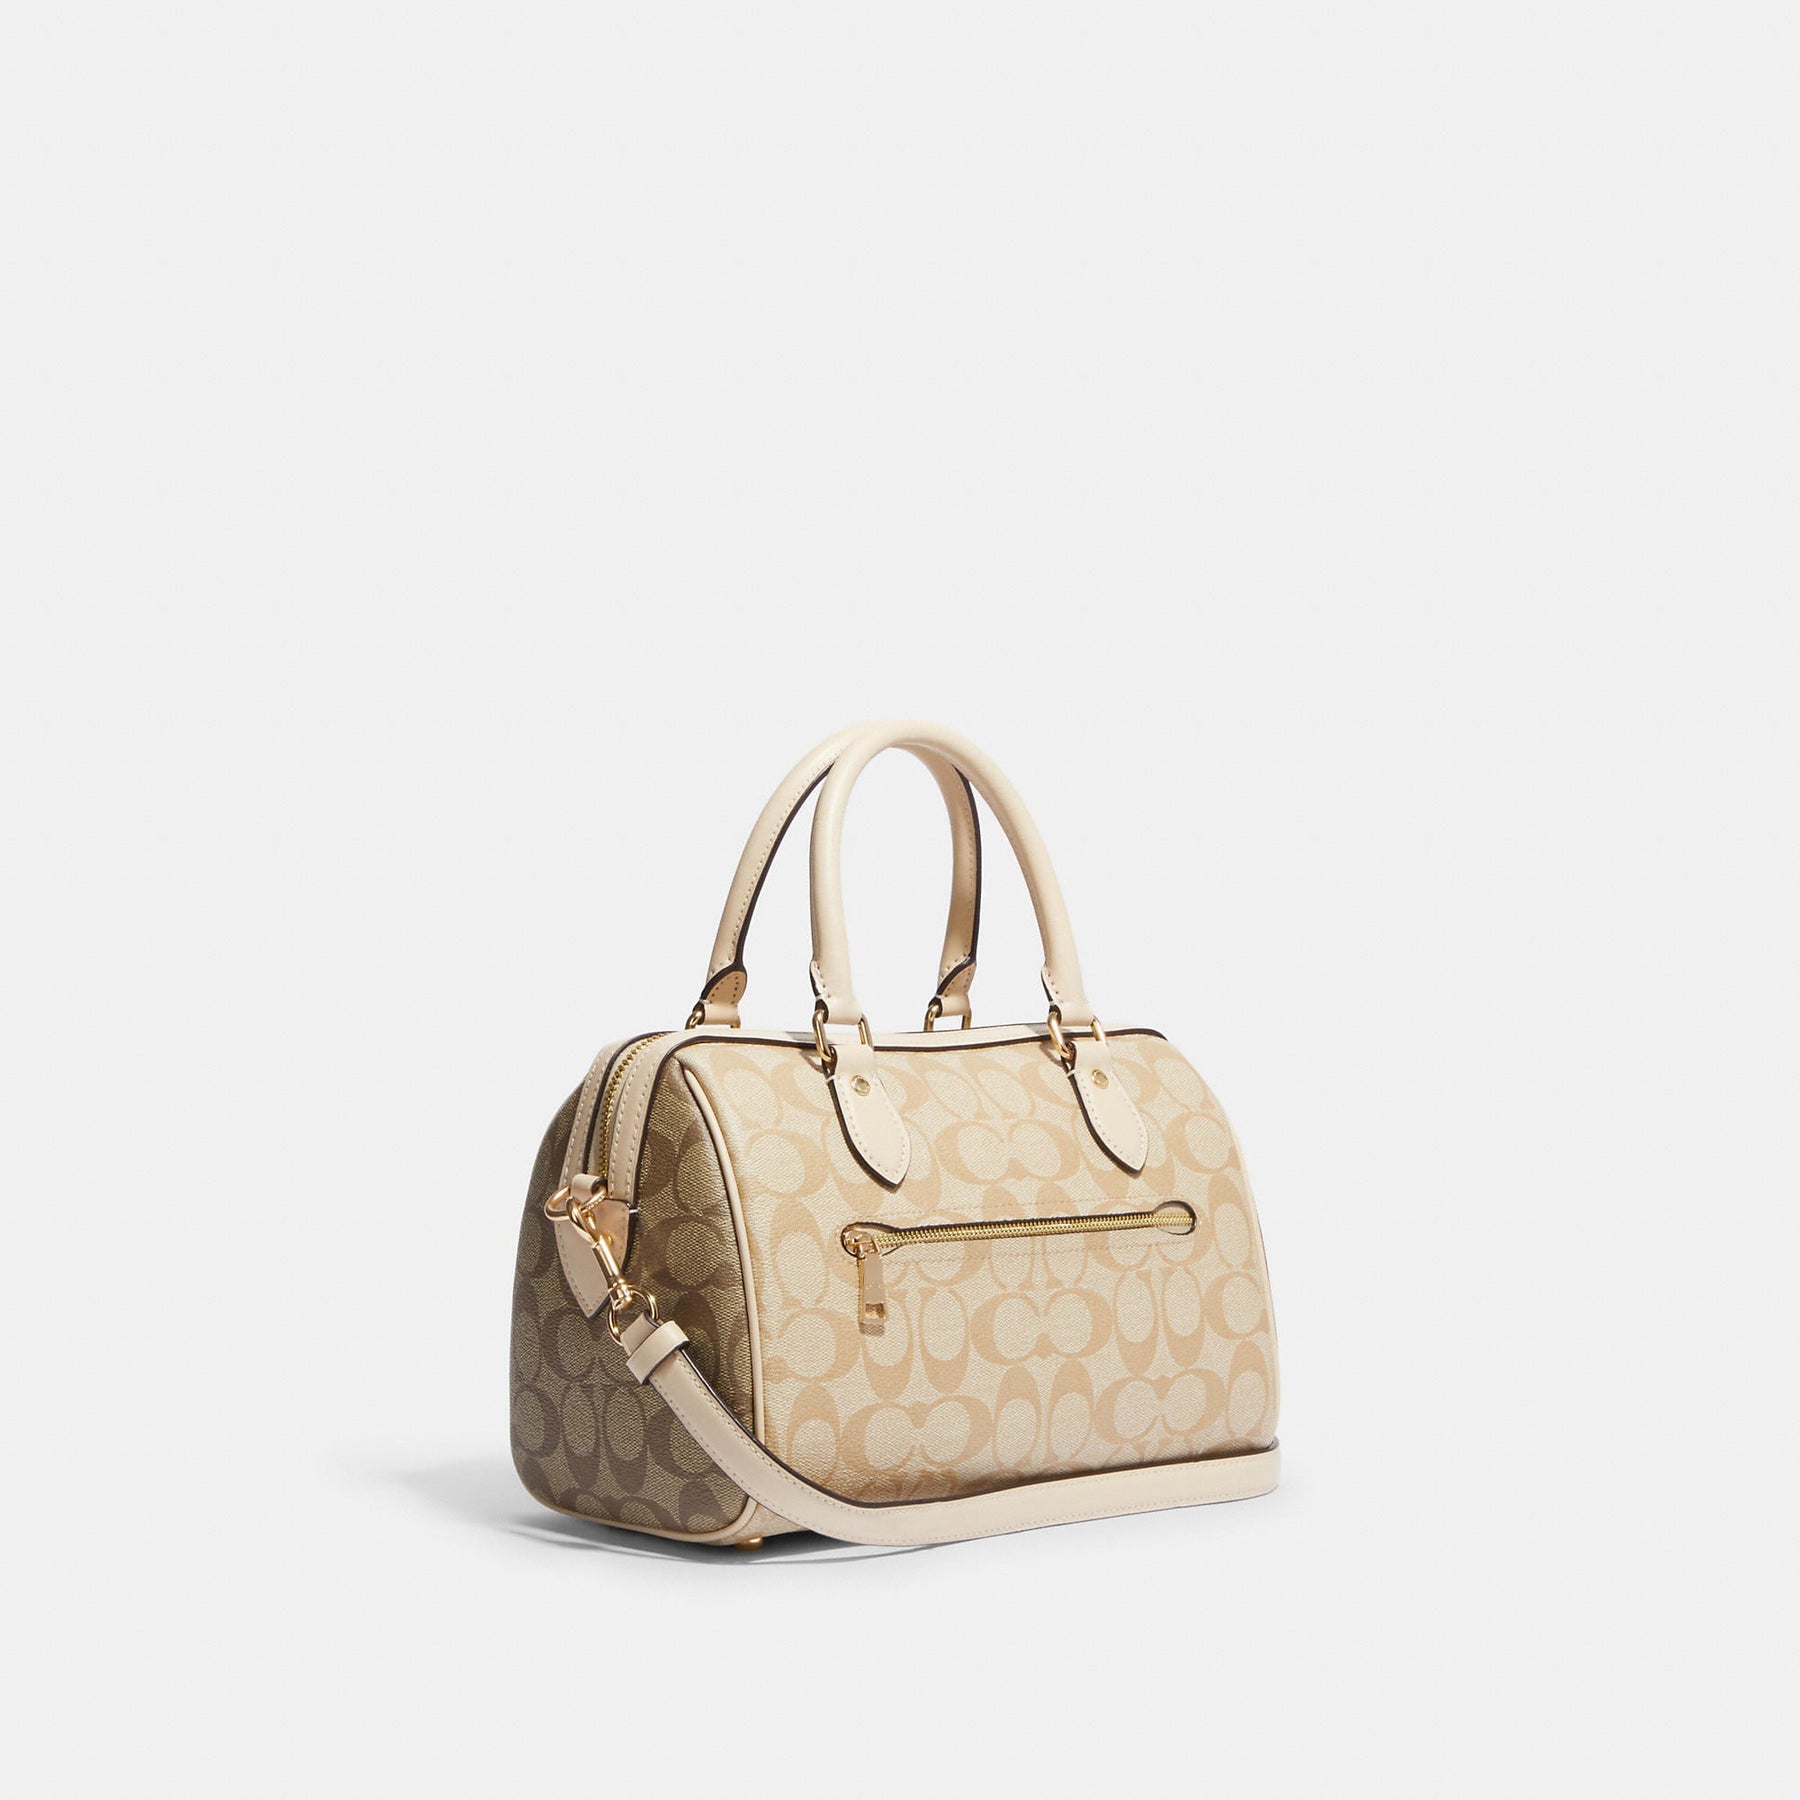 Coach Rowan Satchel in Blocked Signature Canvas in Chalk/Glacier White  Multi (CA149) RM800.00 Signature coated canvas and smooth leather Inside  zip and, By Usaloveshoppe